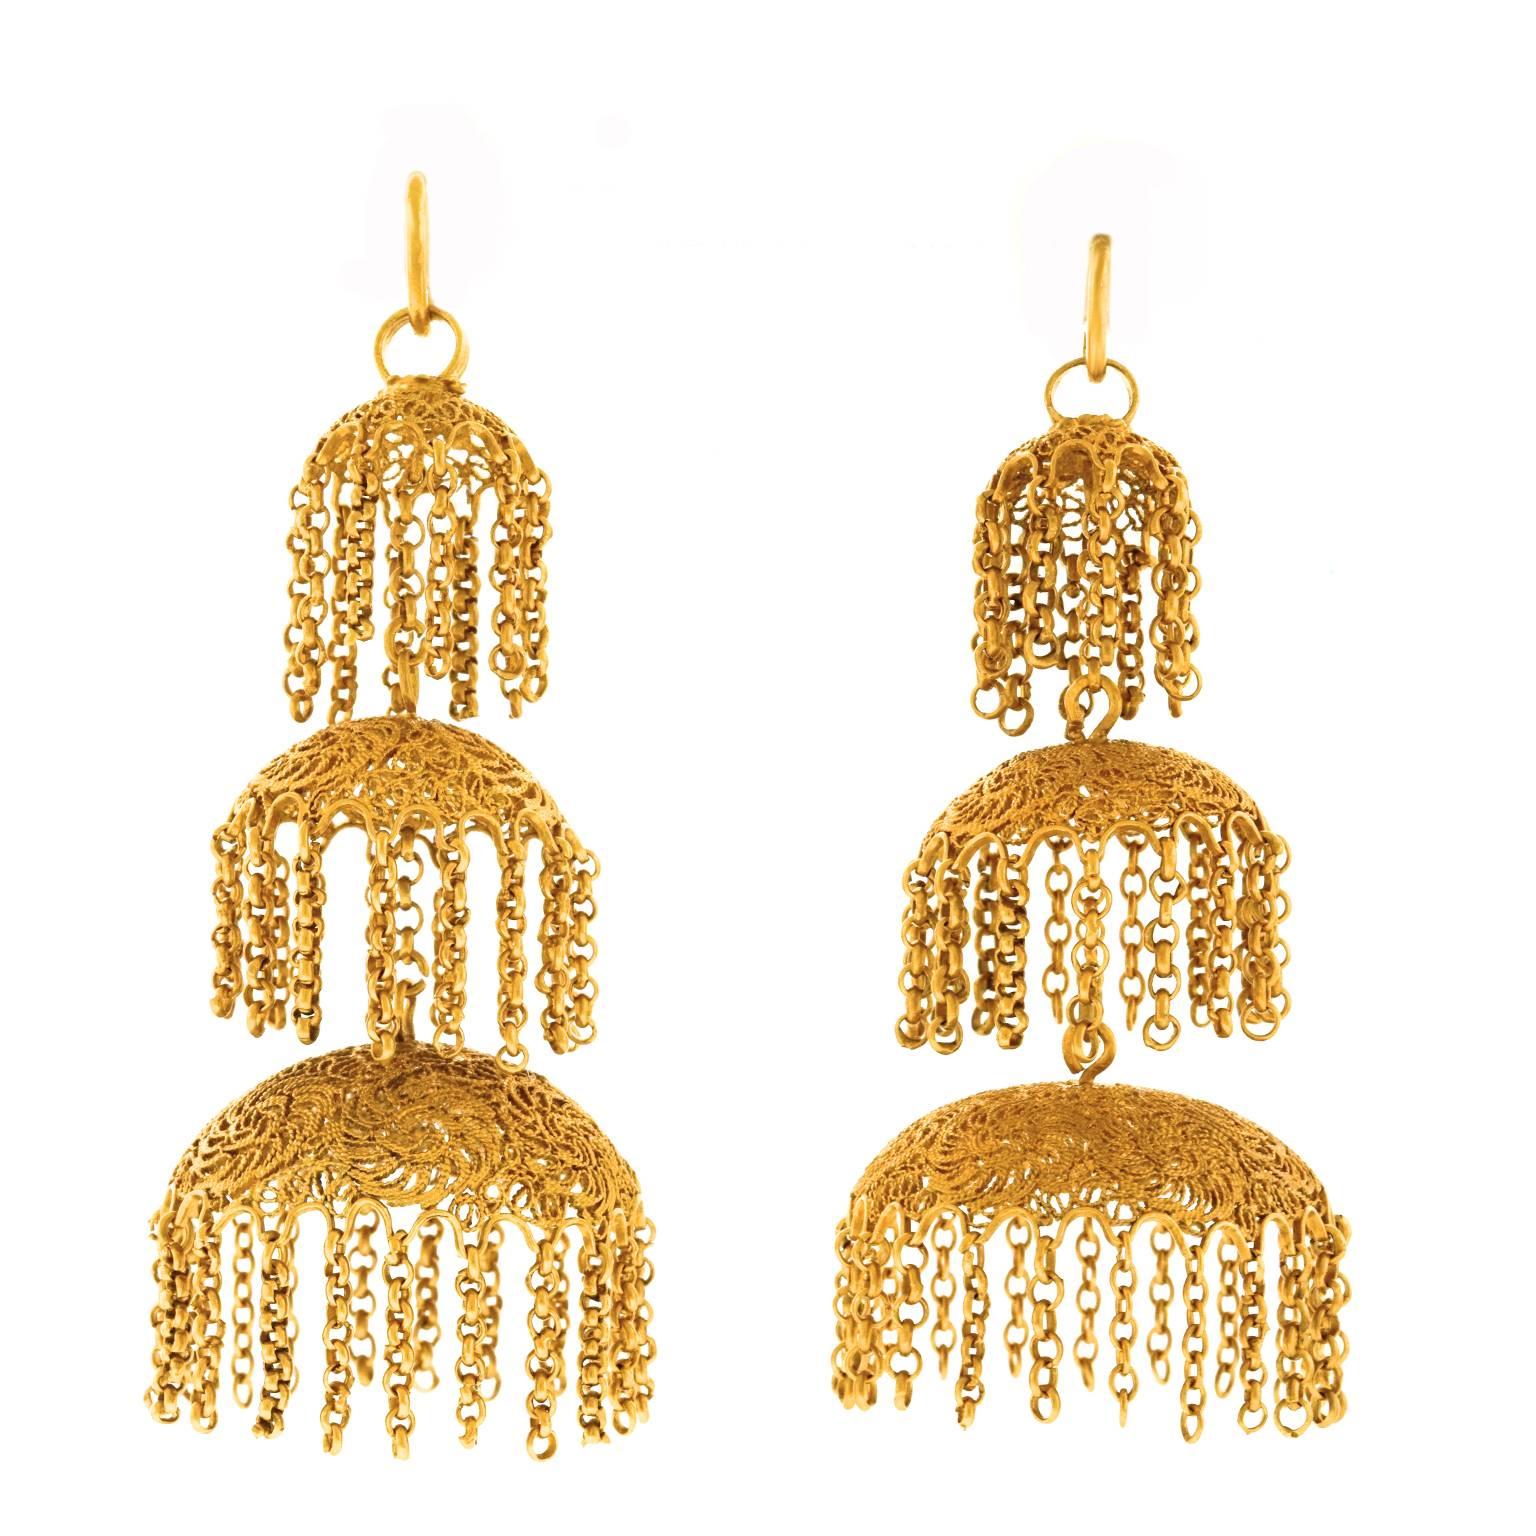 Antique Anglo-Indian High Karat Gold Chandelier Earrings